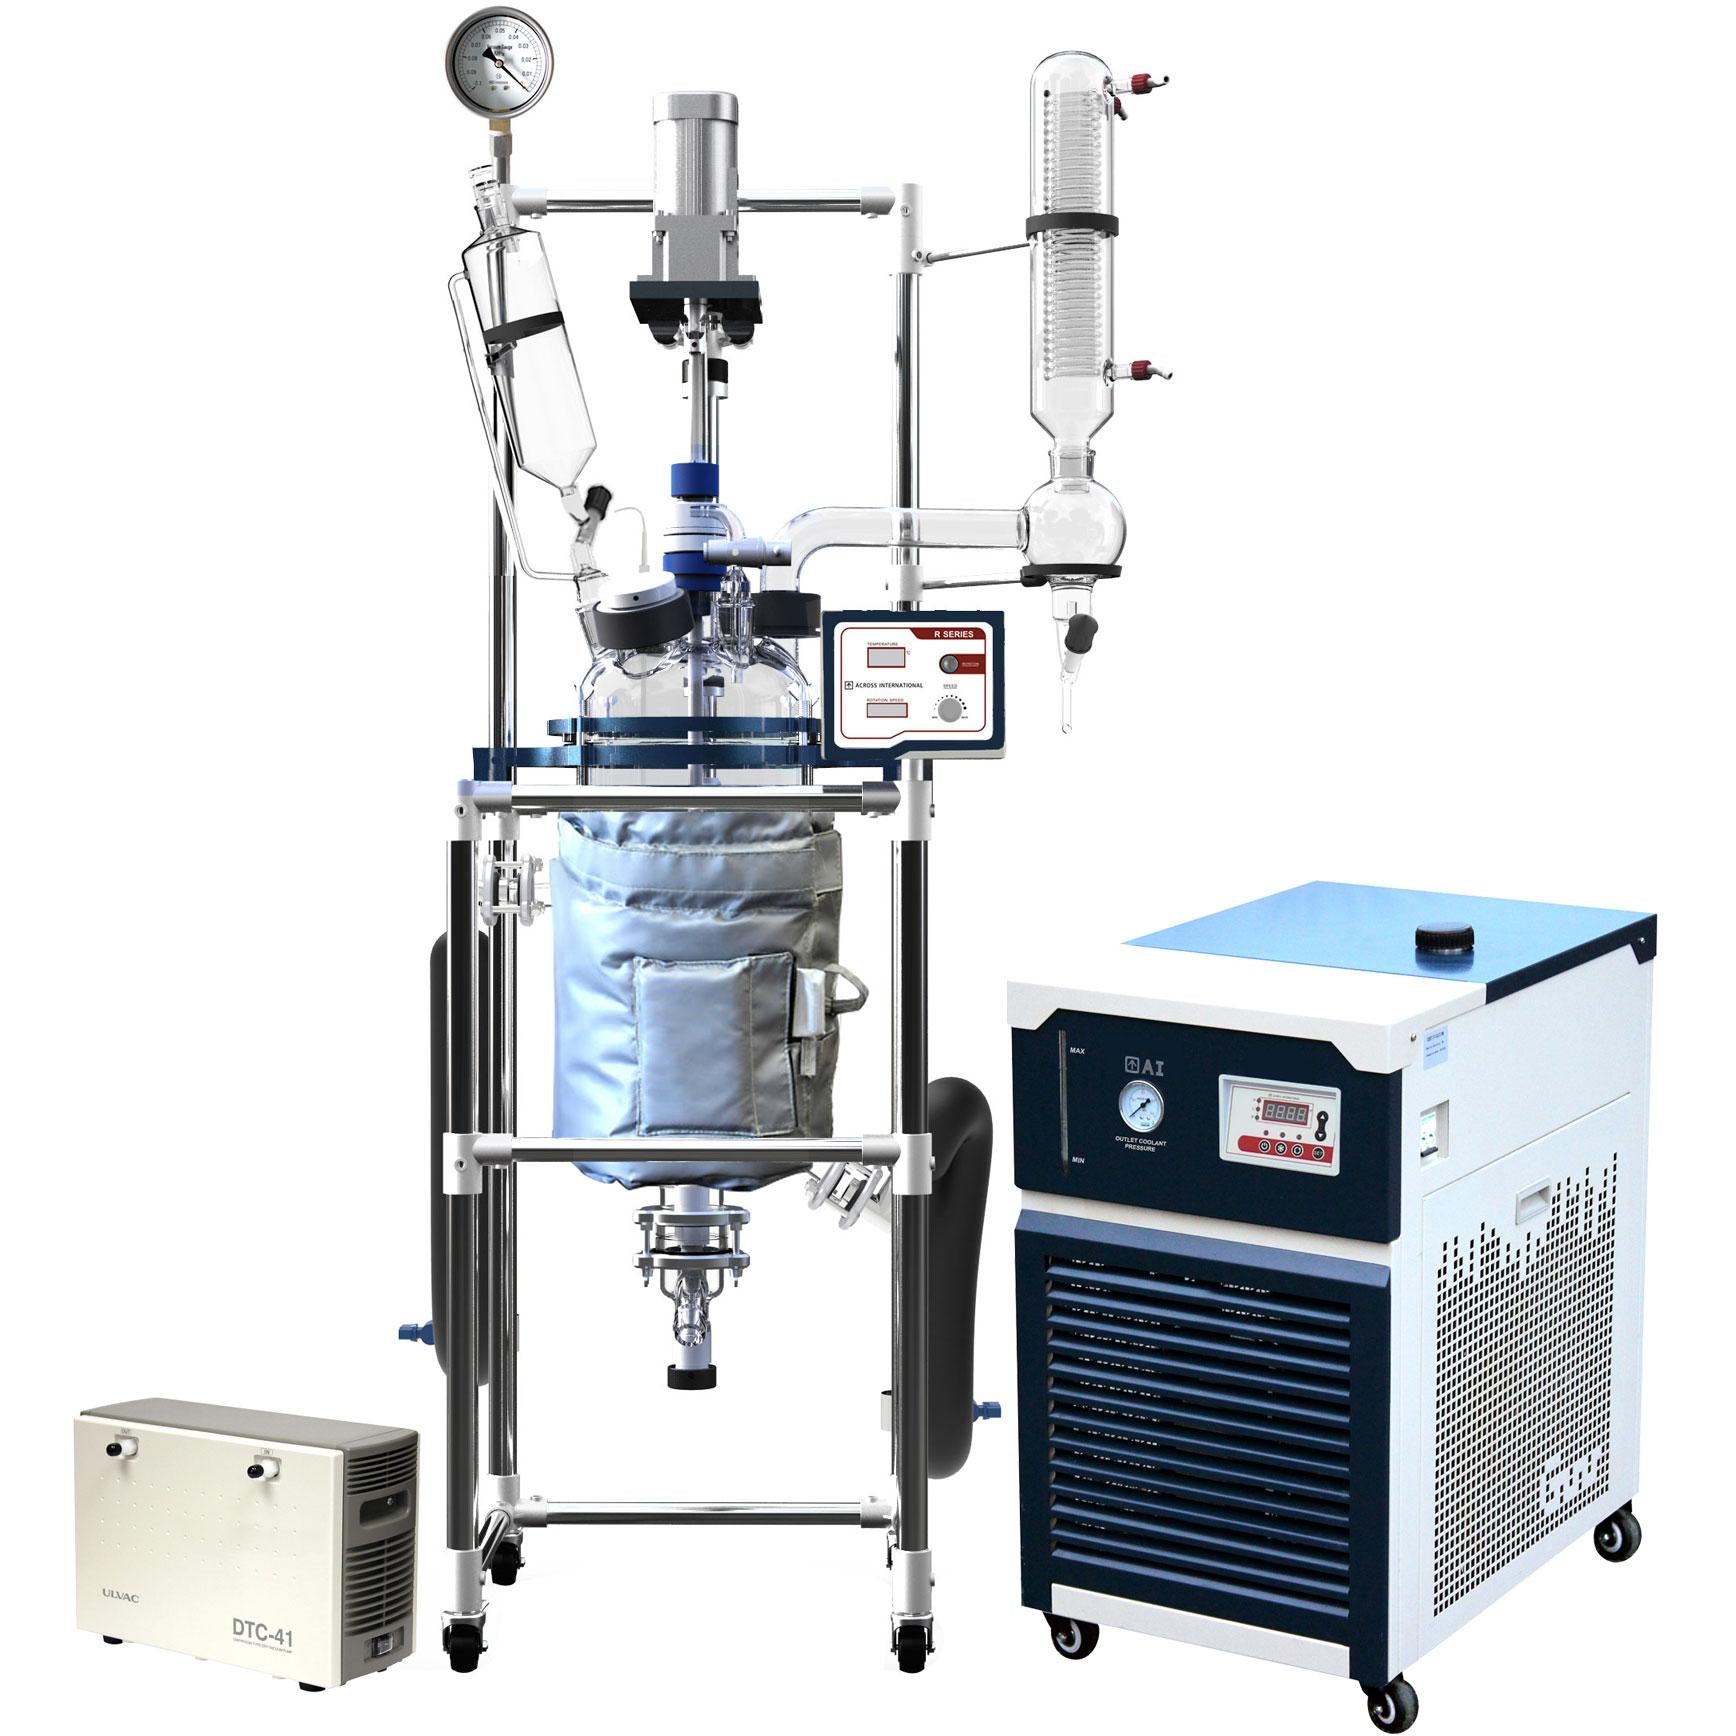 Ai R Series Turnkey Jacketed Glass Reactor Kits, 10 Liter, with Chiller & Pump